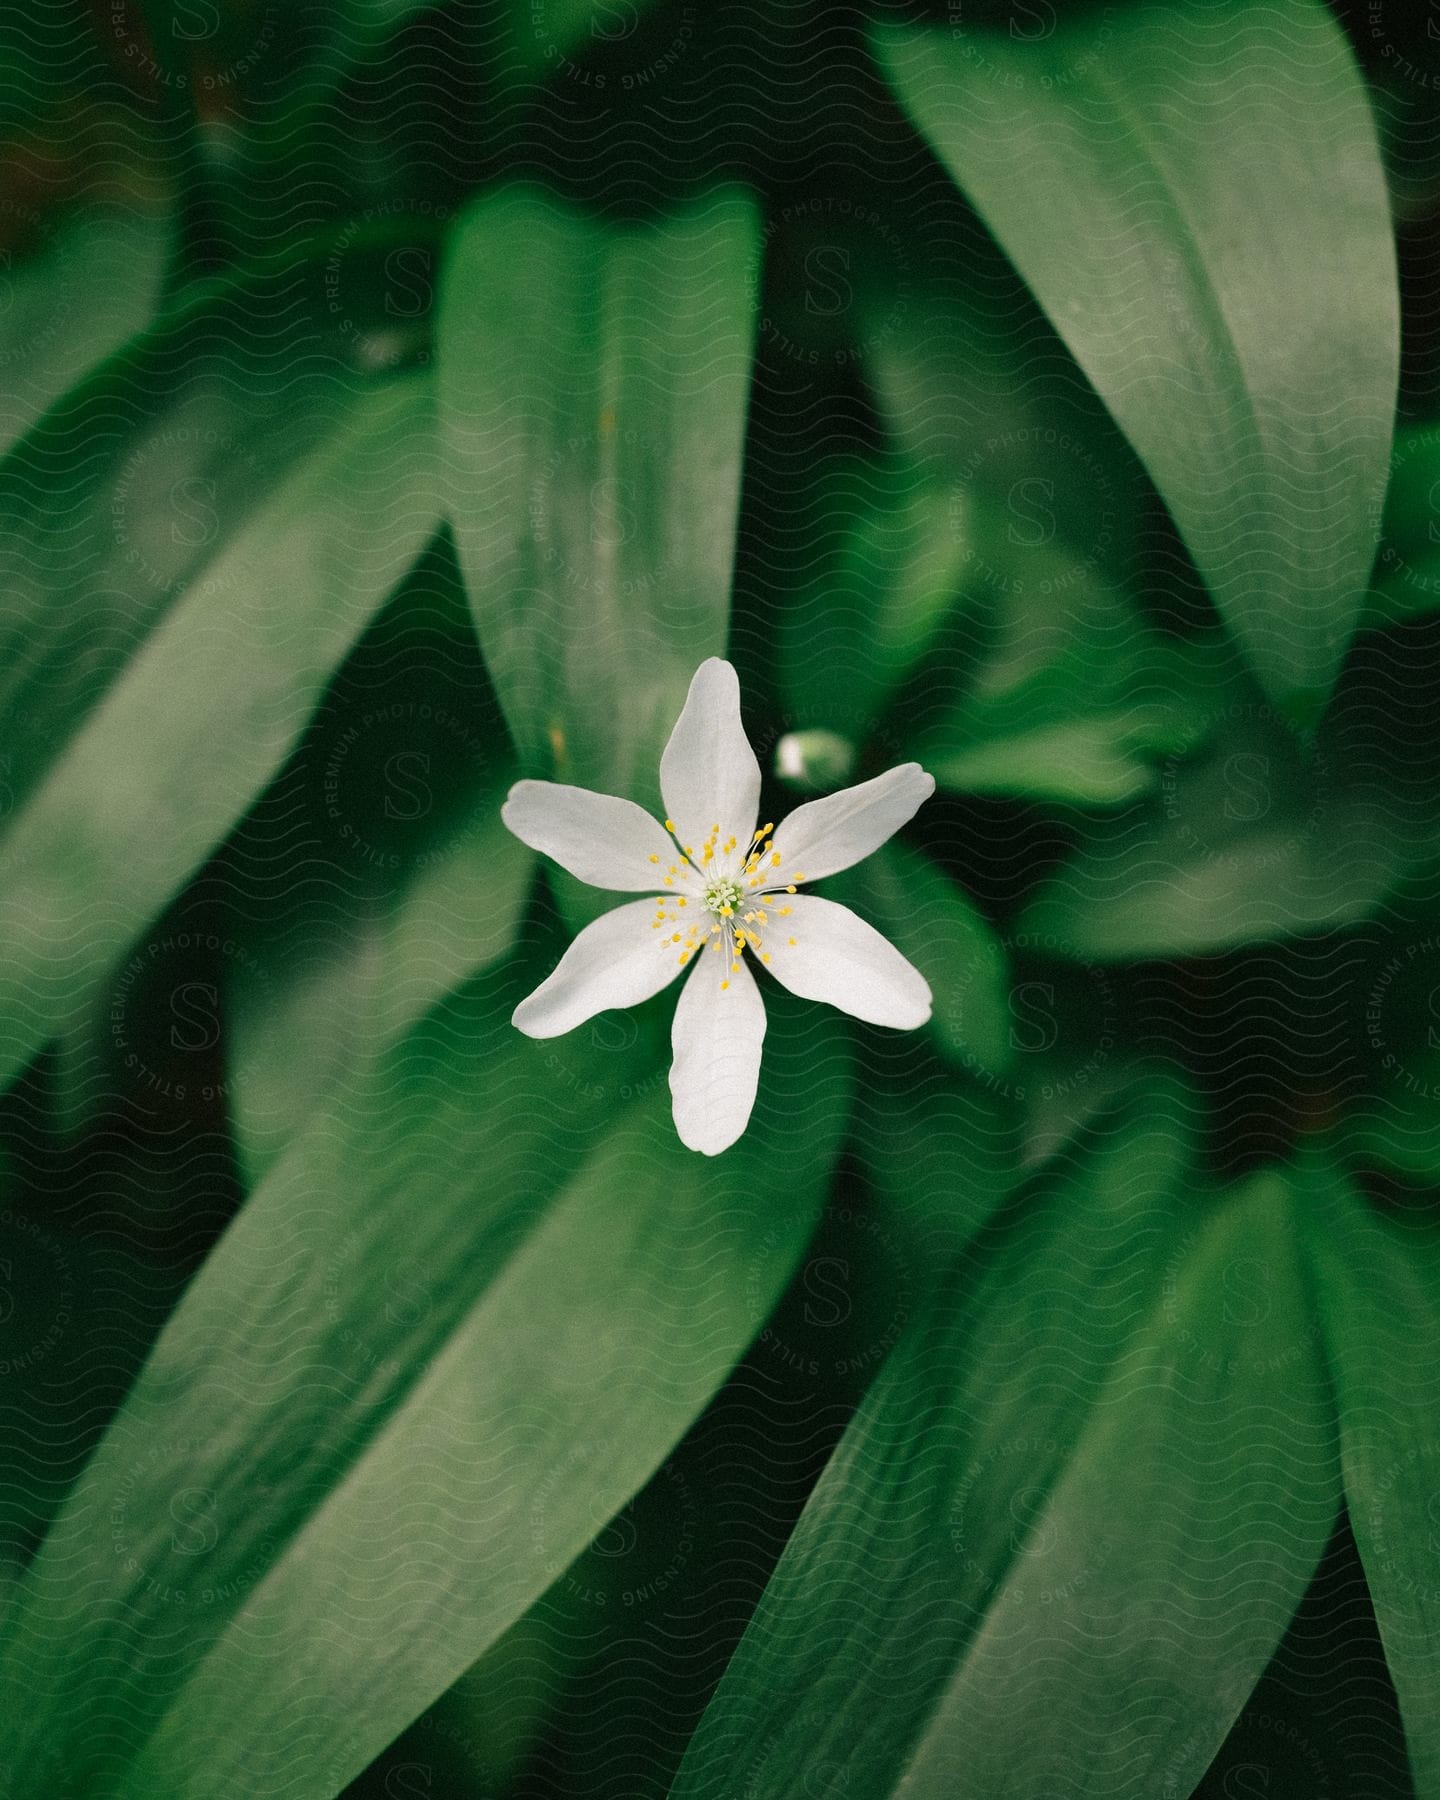 A delicate white flower with a bright yellow center blooms amidst lush green leaves.